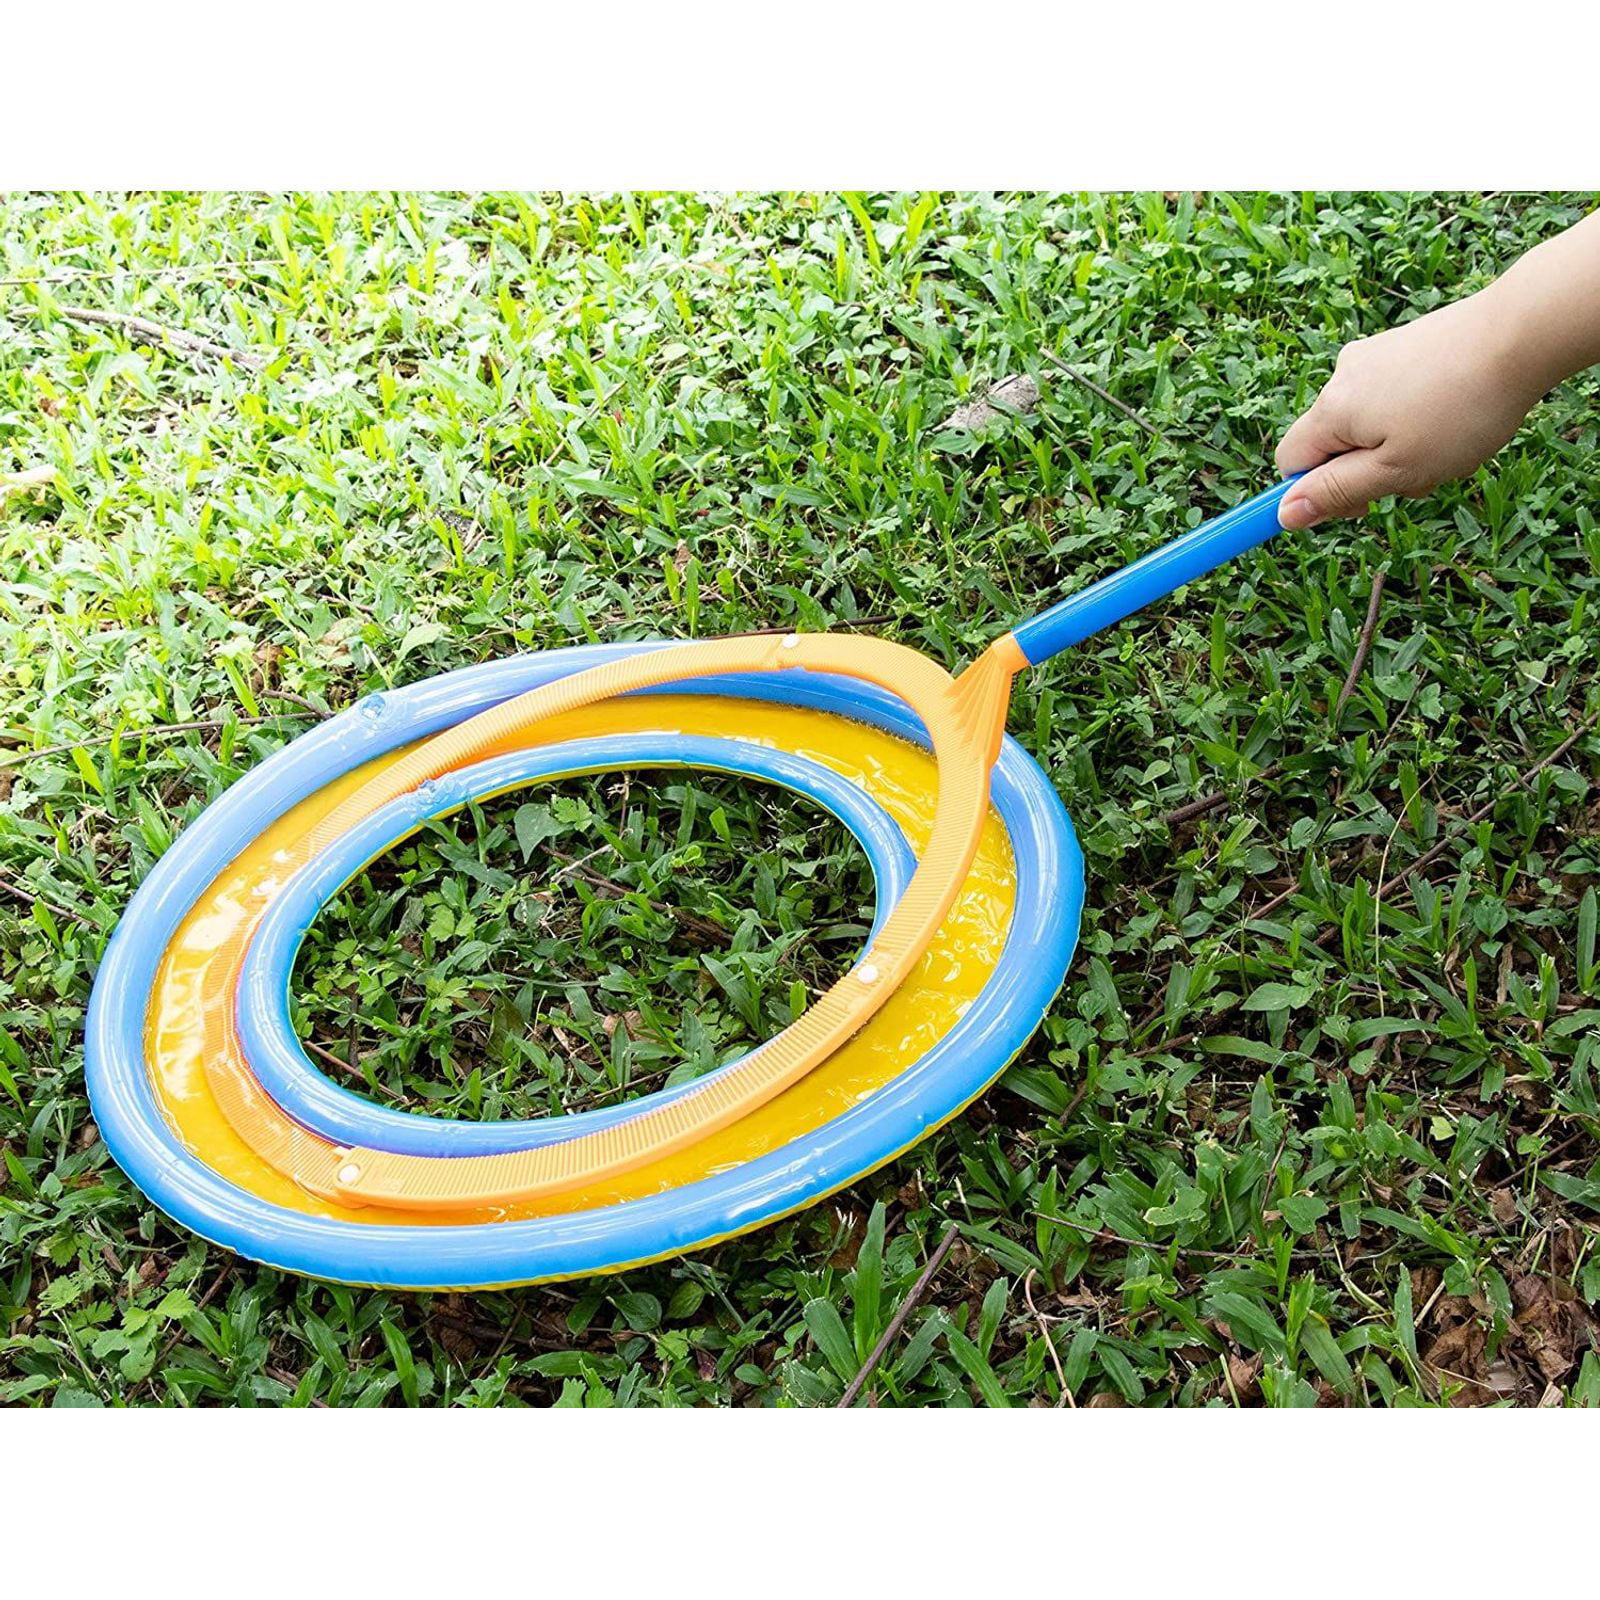 Blue Panda Large Bubble Wand with Bubbles and Tray 